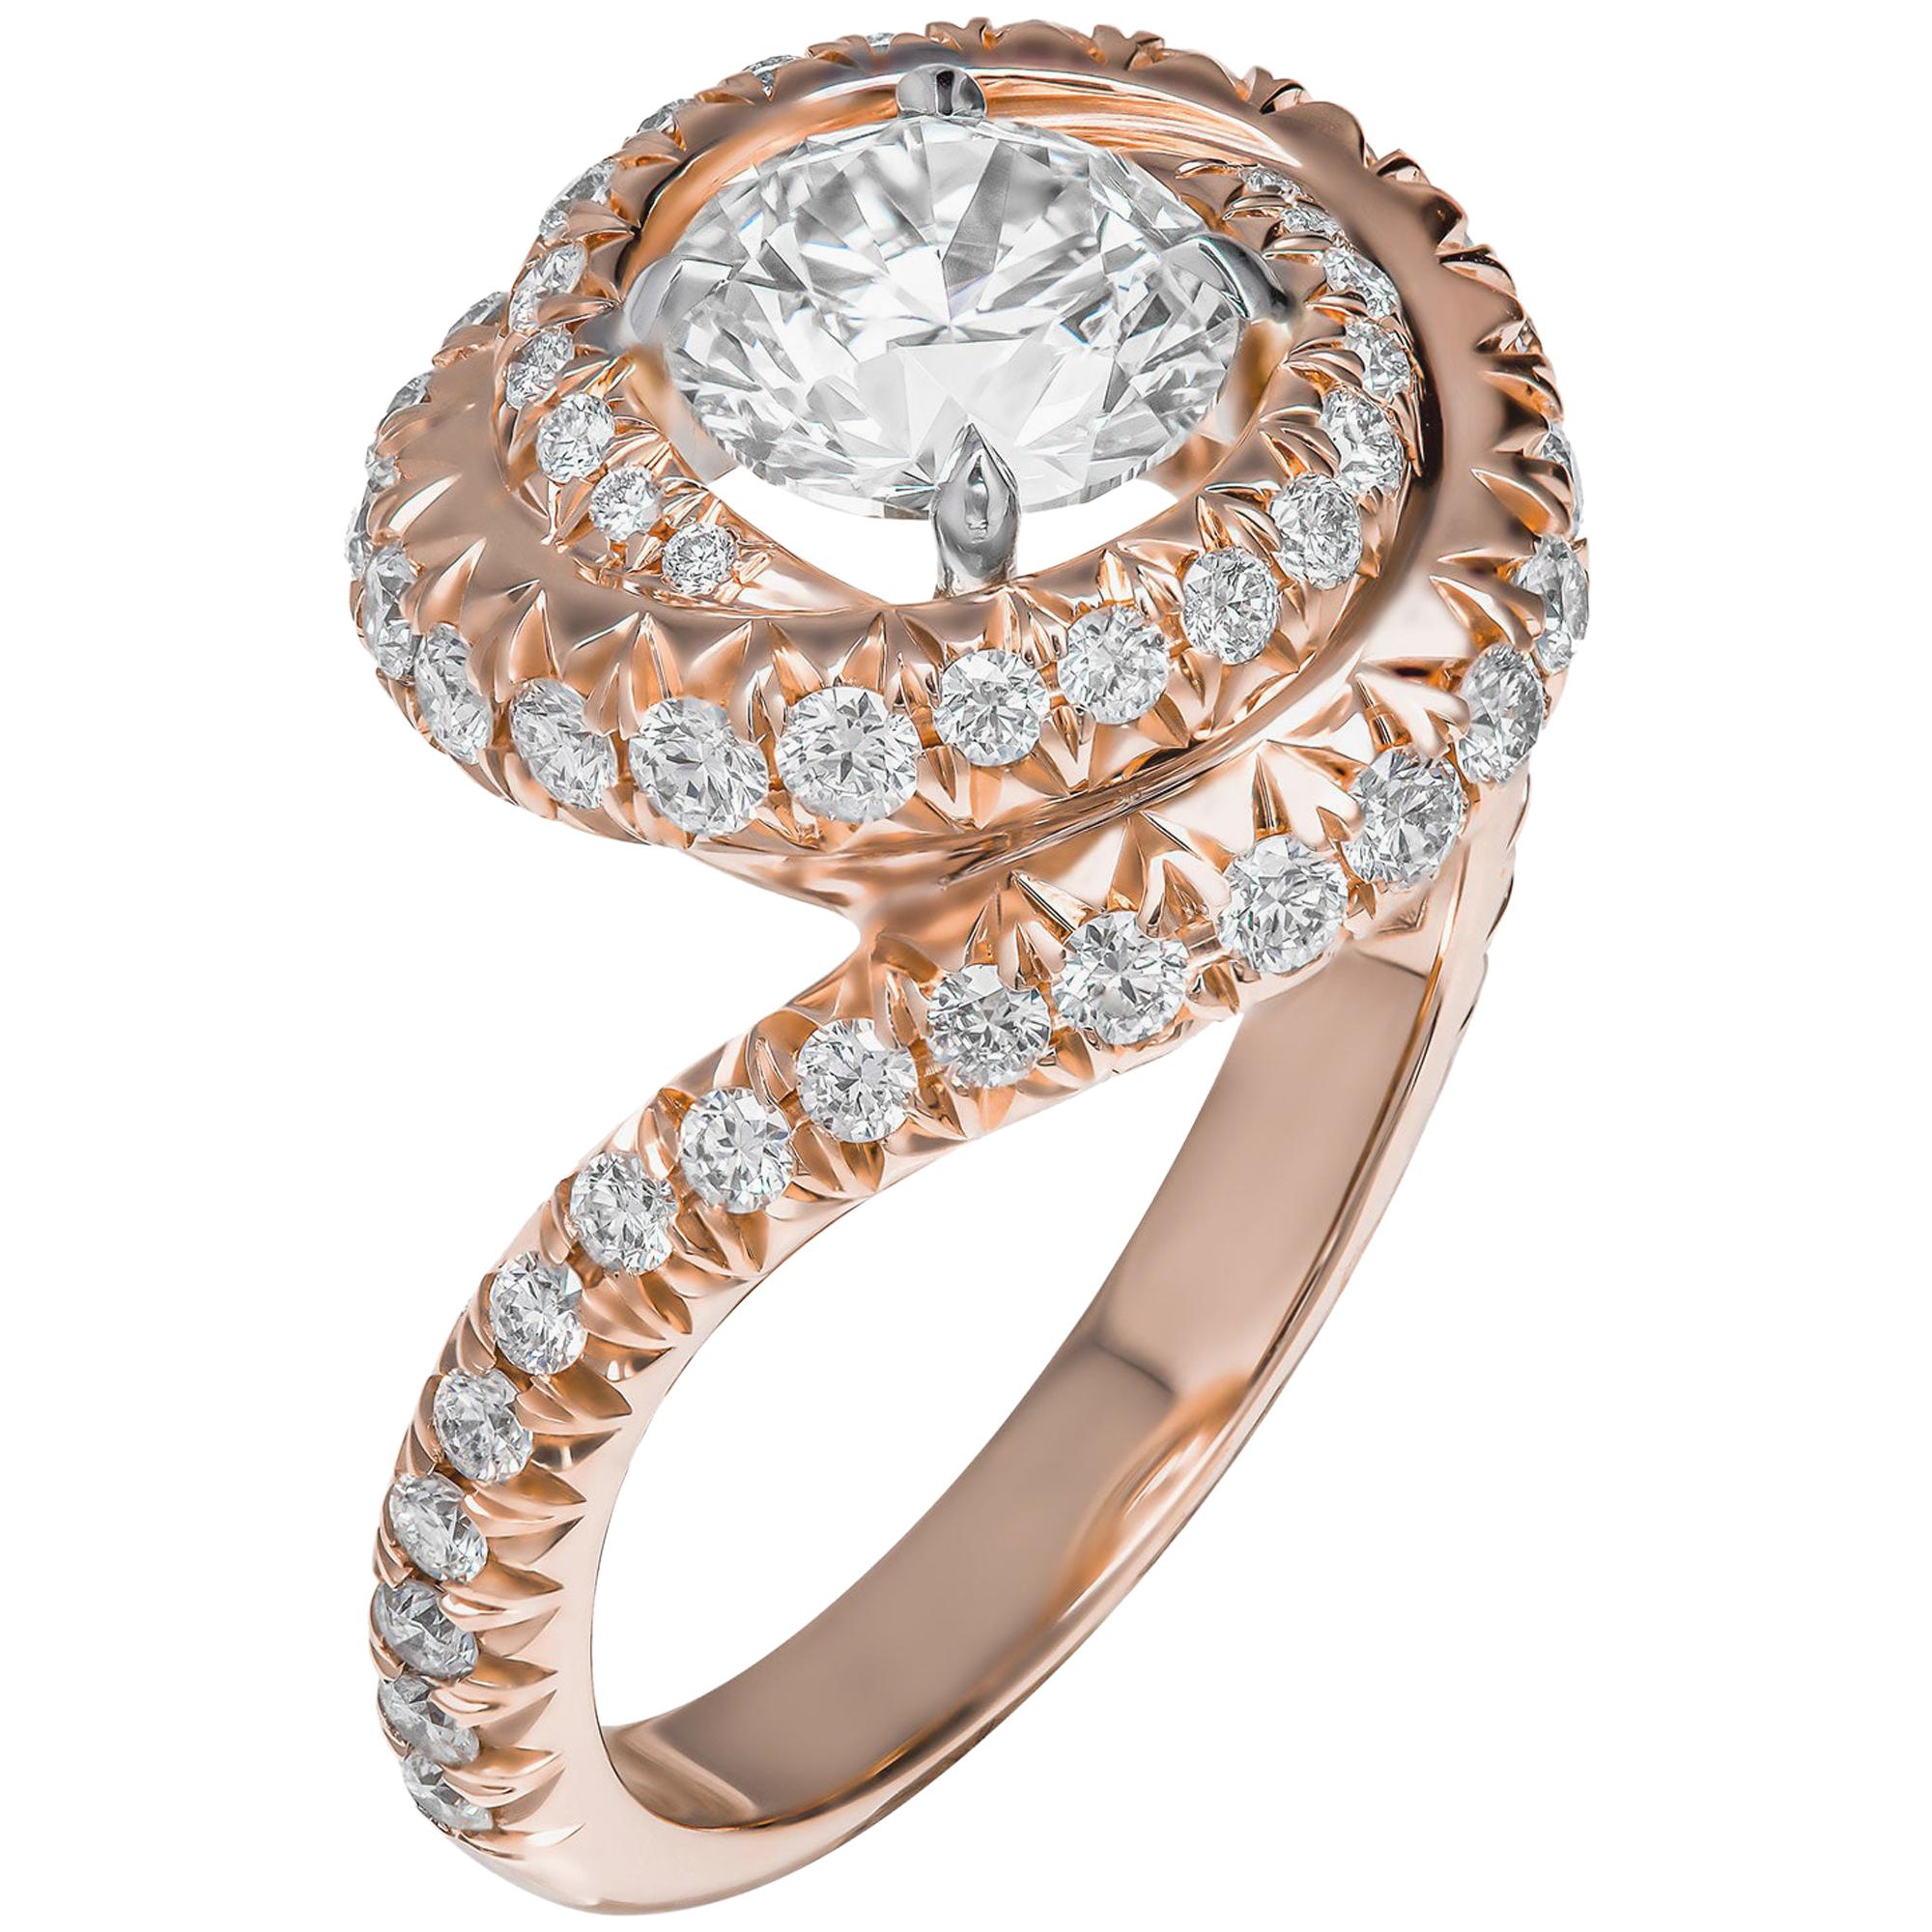 GIA Certified Diamond Swirl Cocktail Ring with 1.30 Carat Round Diamond For Sale